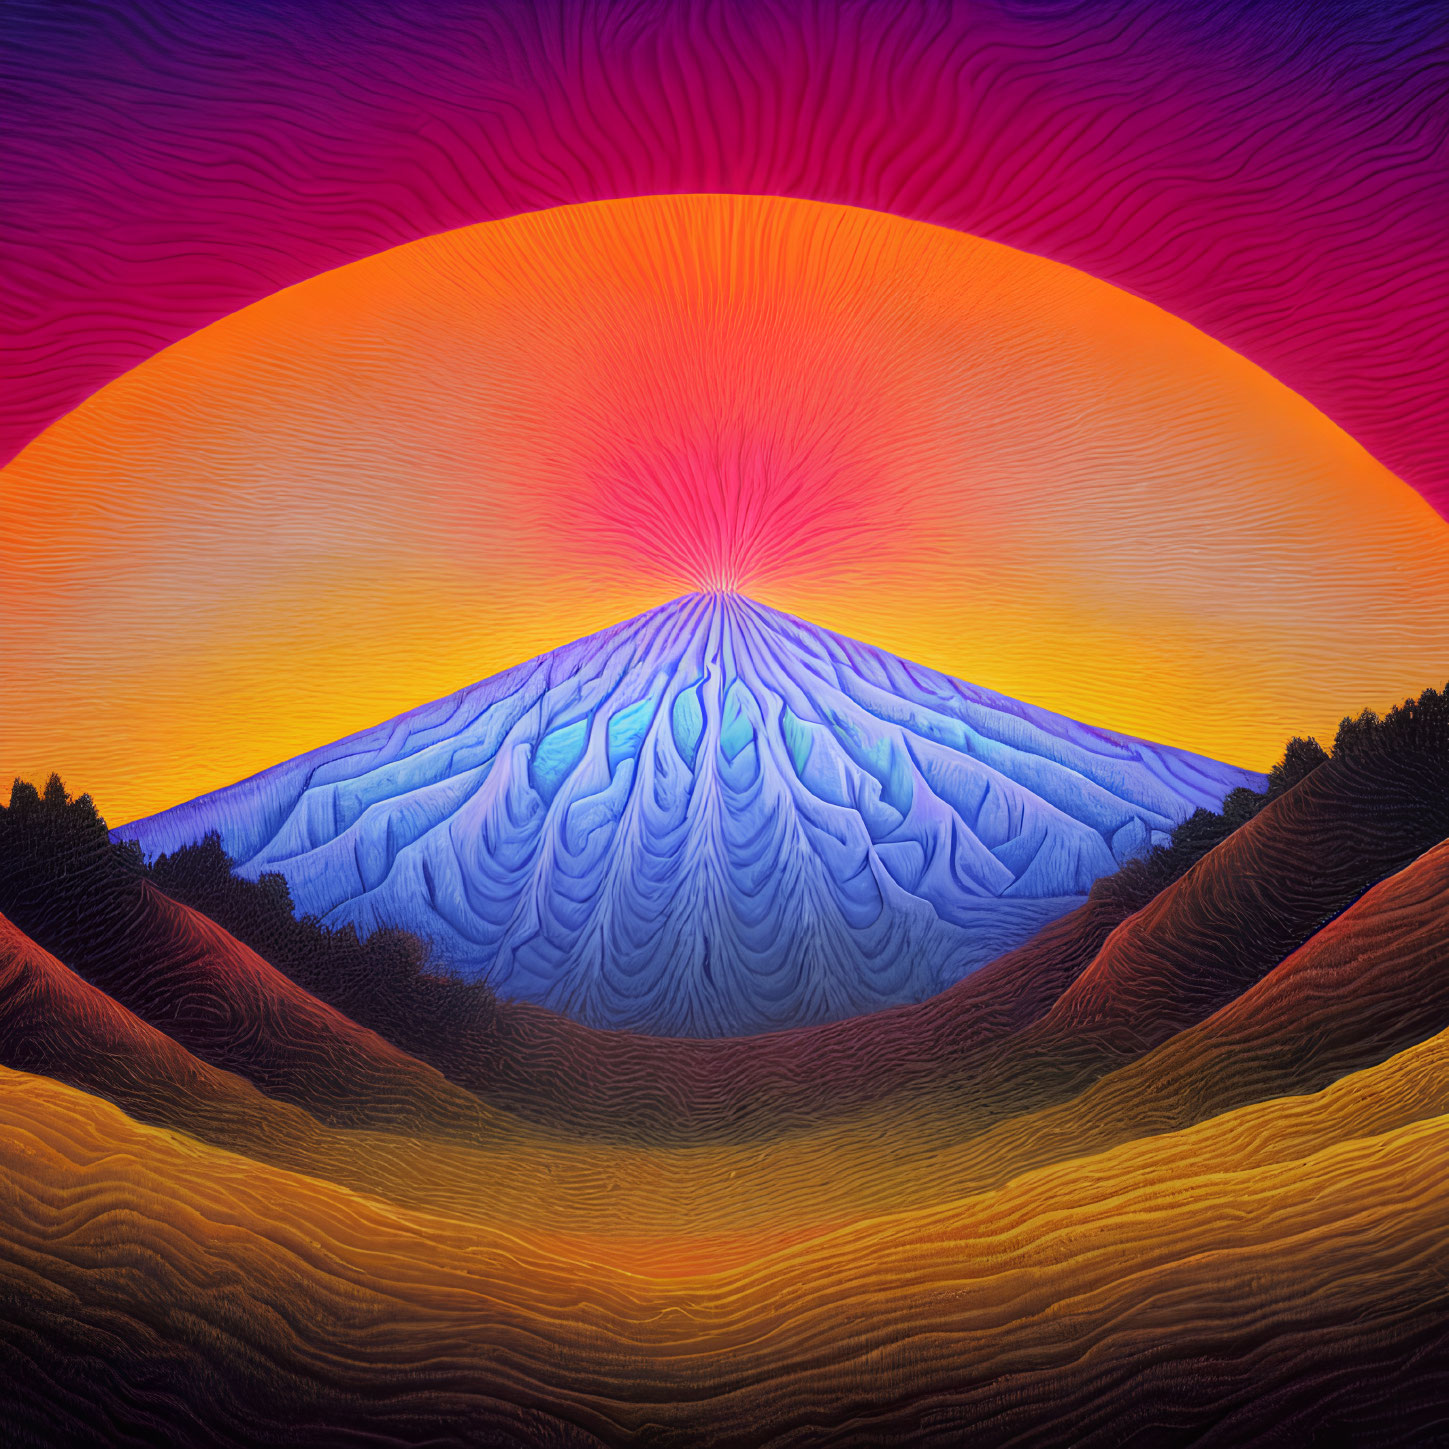 Colorful Mountain Illustration with Psychedelic Sky